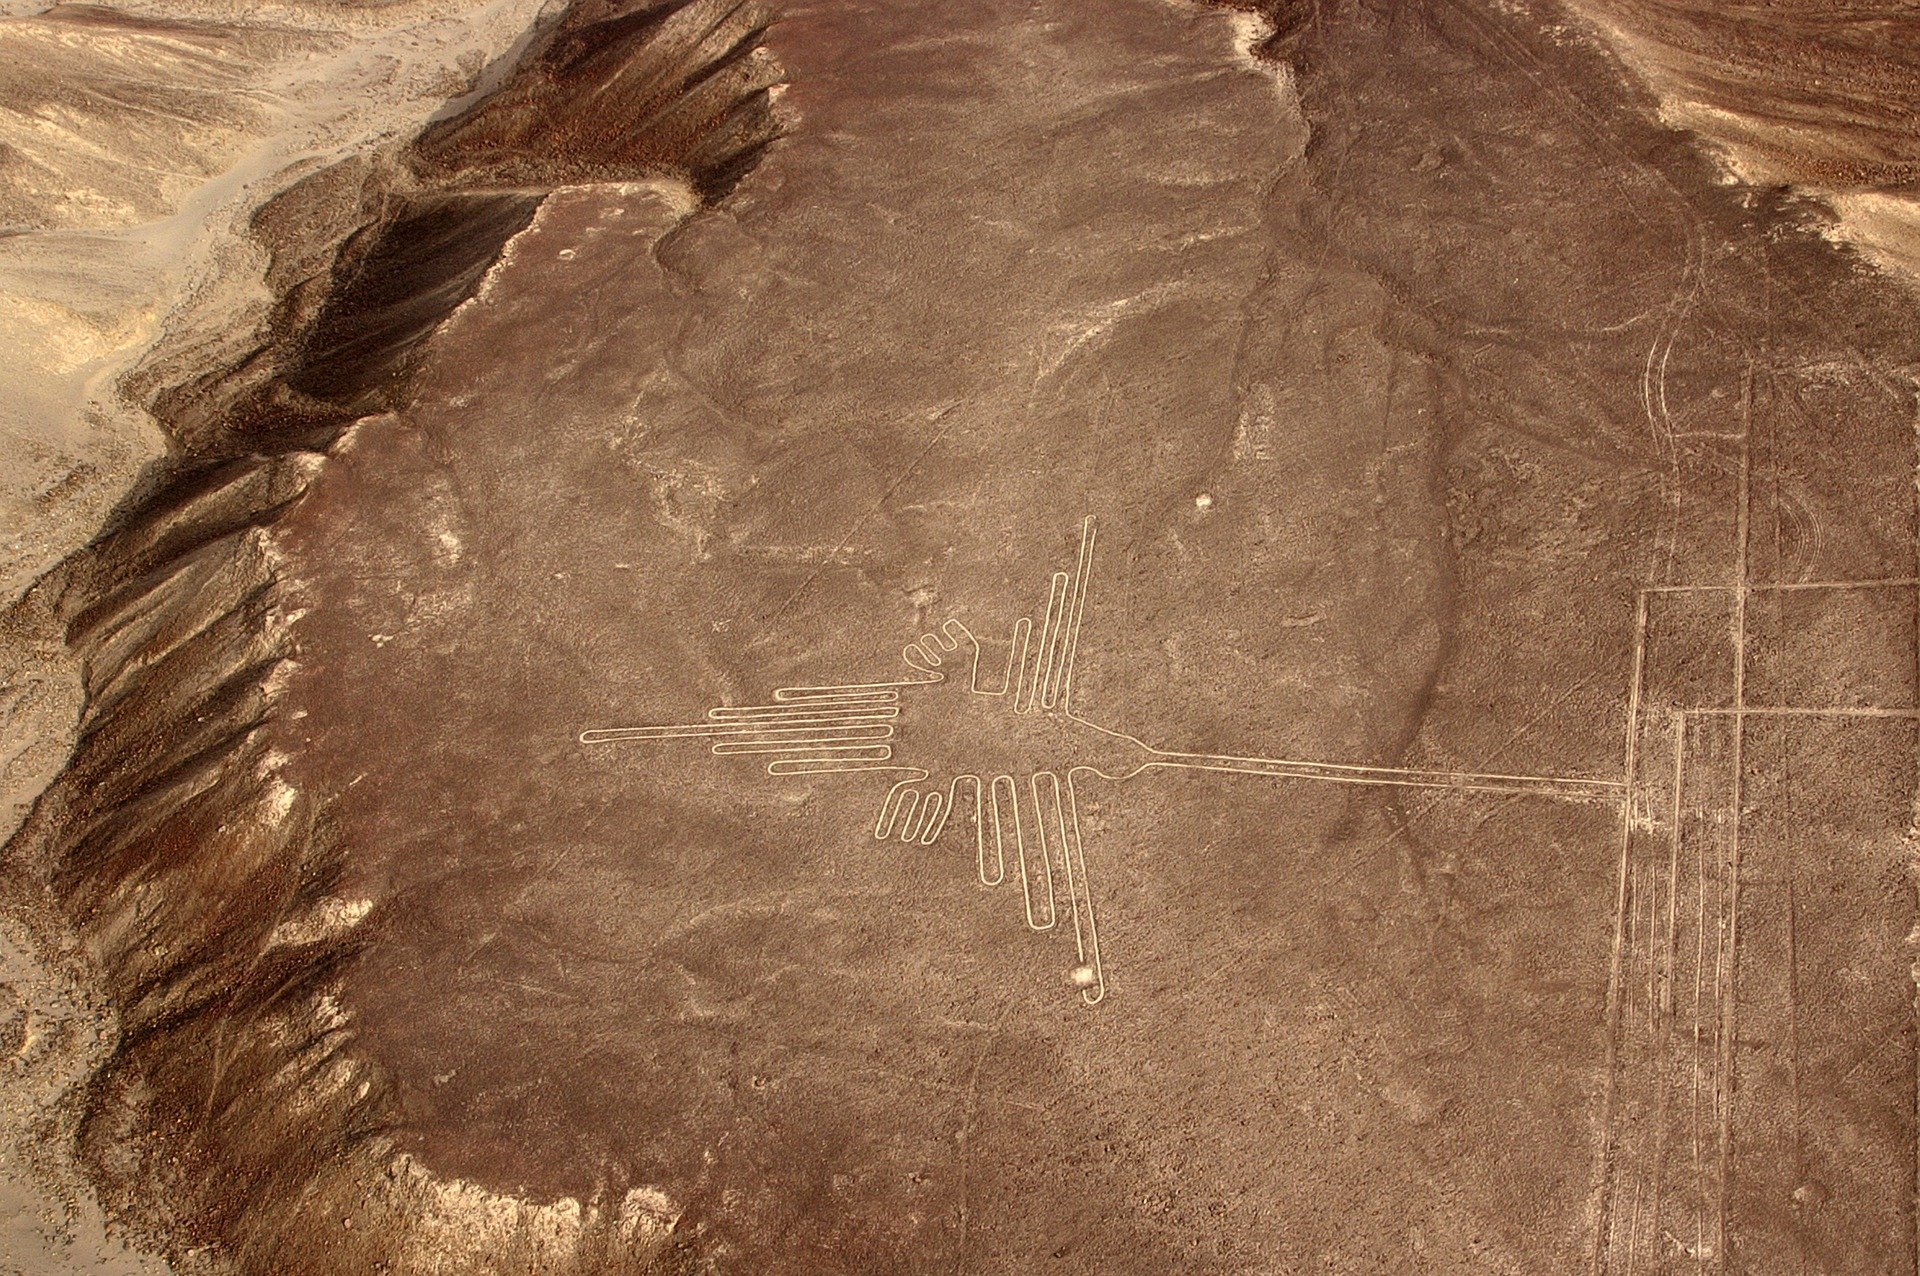 Geoglyph art made into a large area of sand